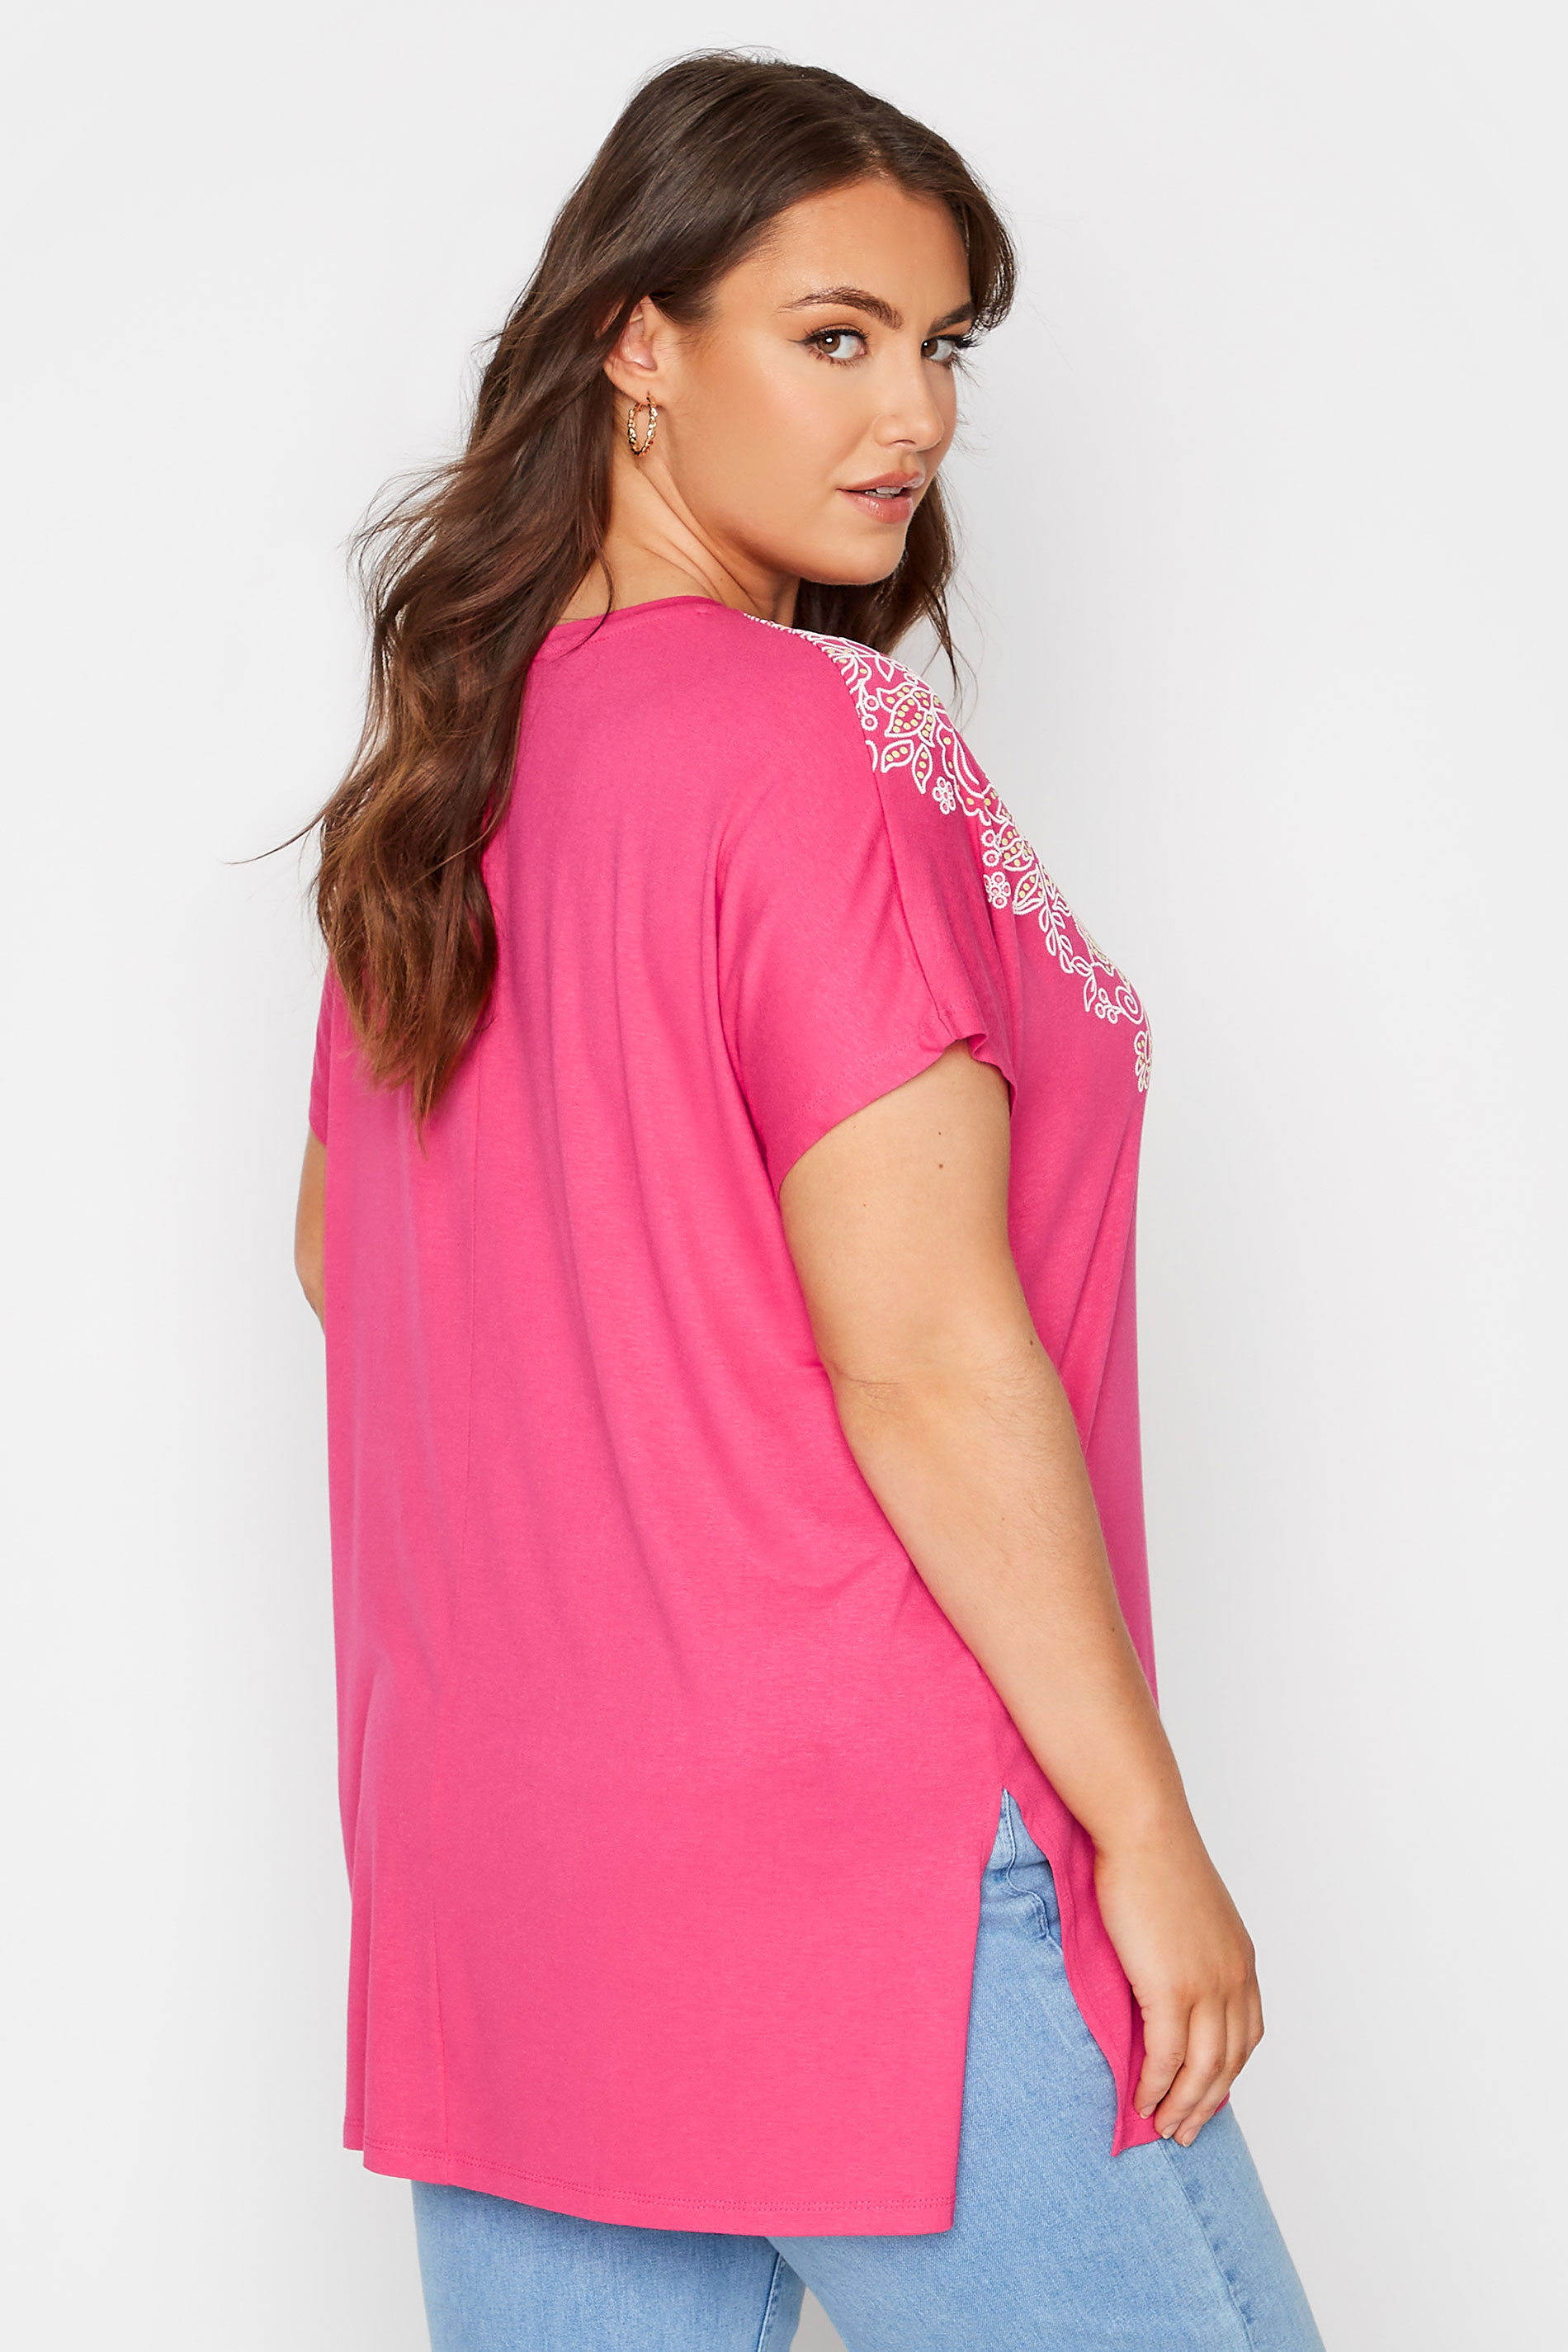 Grande taille  Tops Grande taille  Tops Jersey | Top Rose Manches Courtes Brodé Aztèque - CG60816